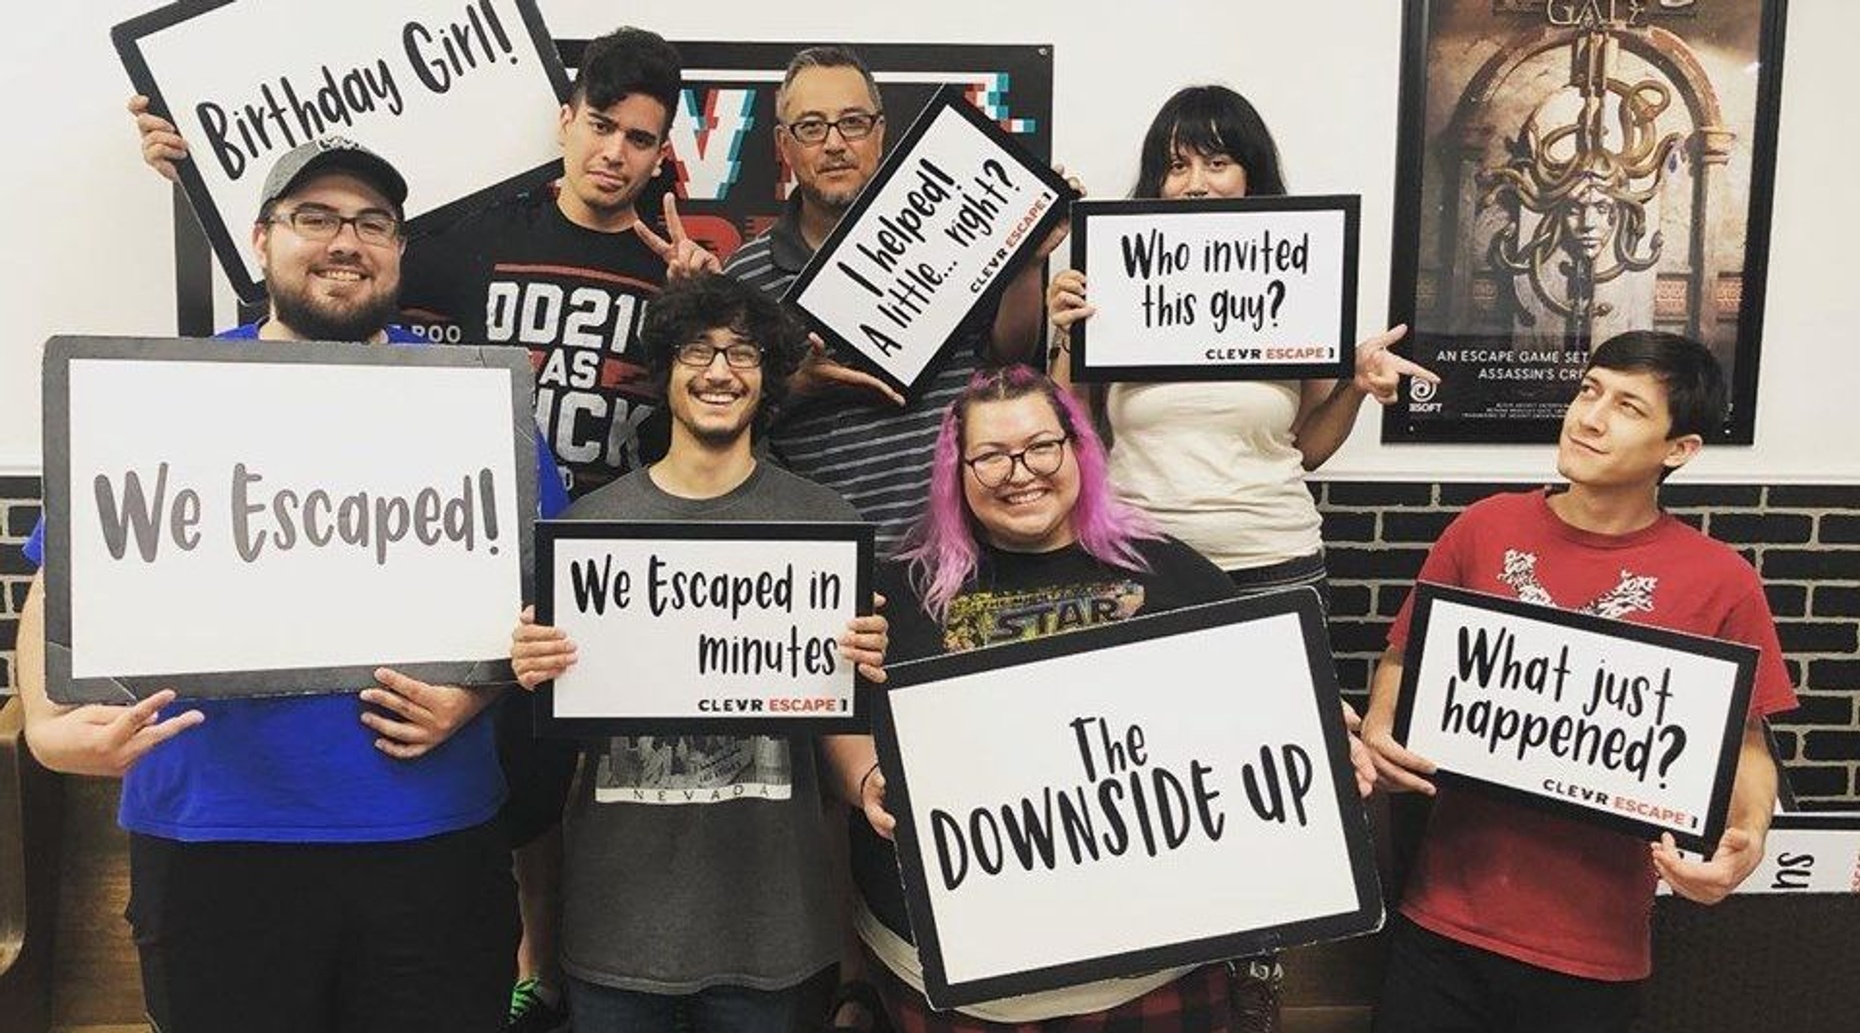 Downside Up Escape Game in Tulare